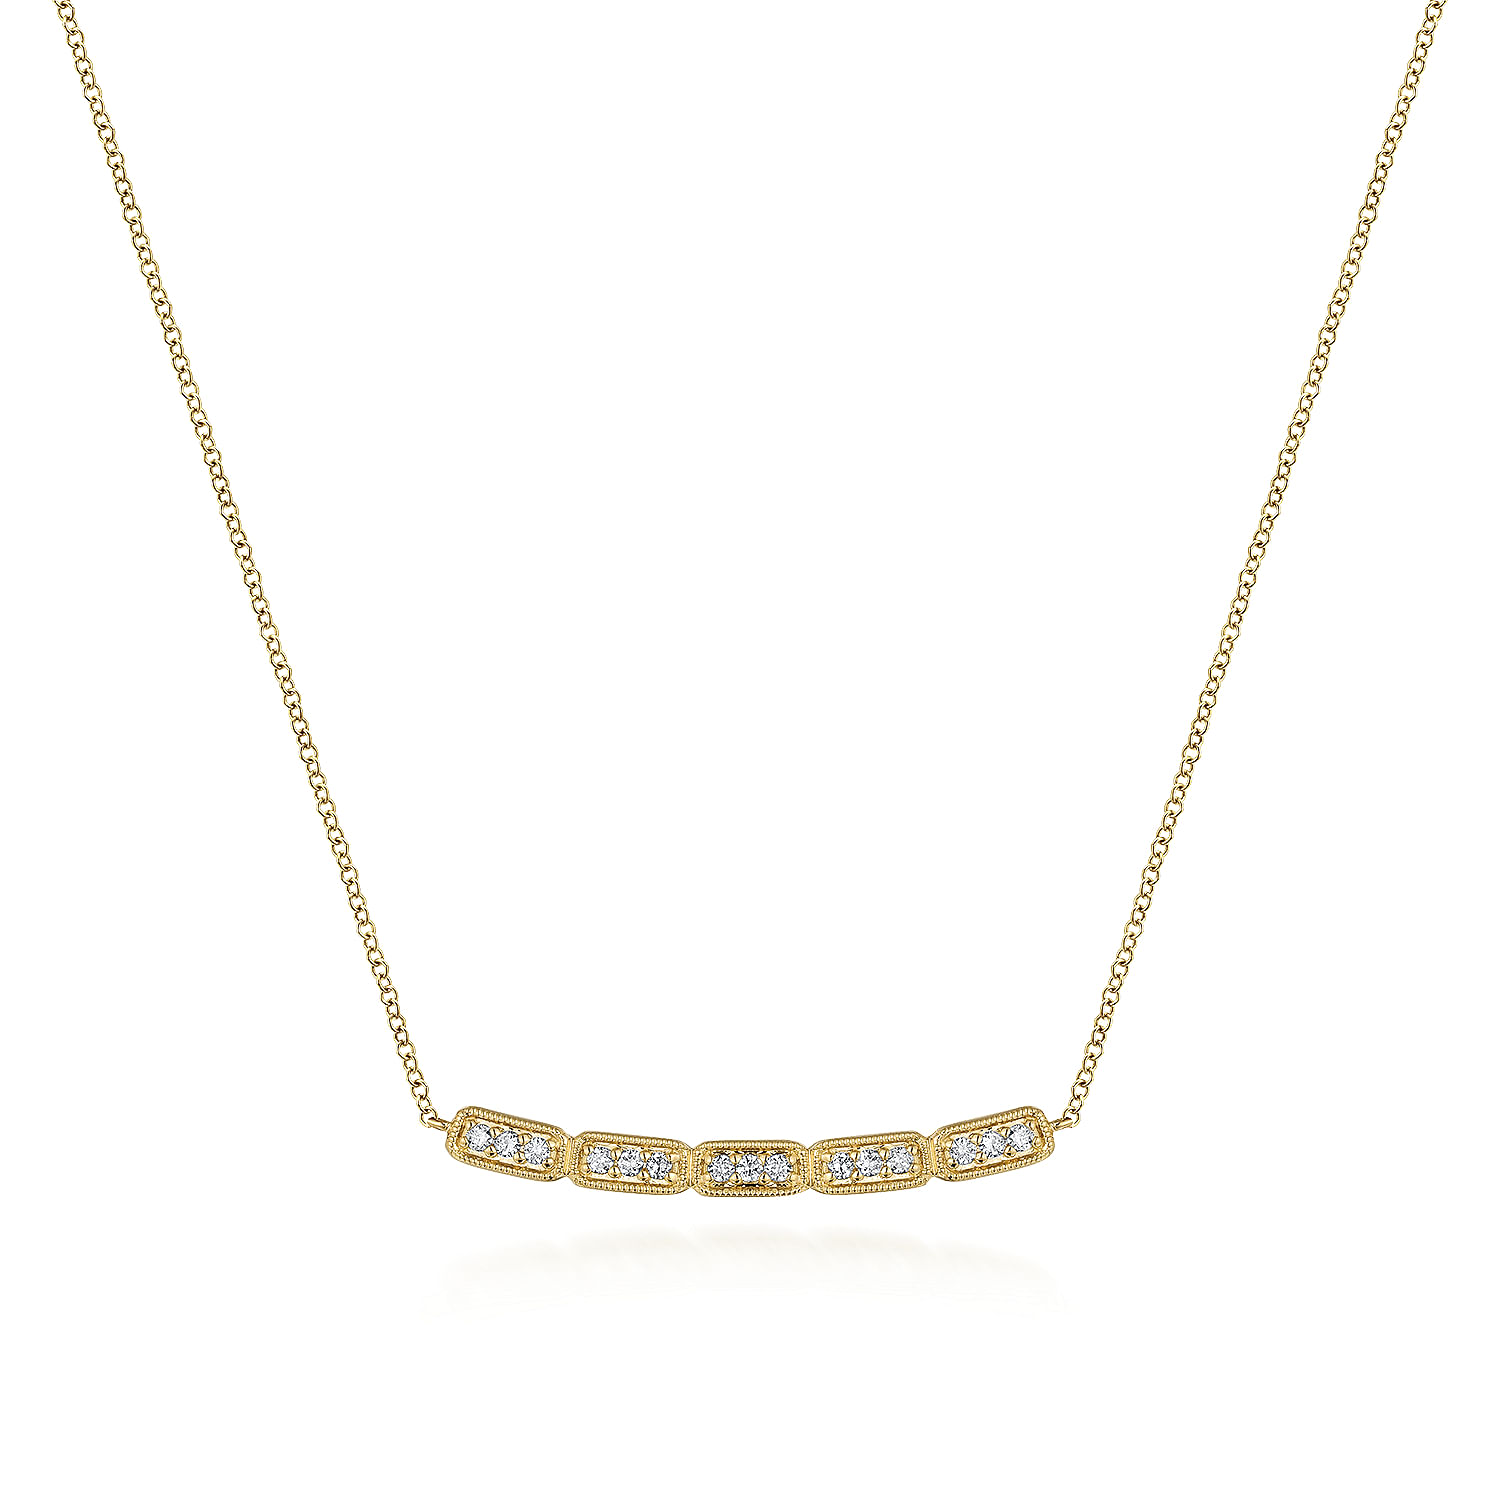 14K Yellow Gold Curved Rectangular Station Bar Necklace with Diamonds